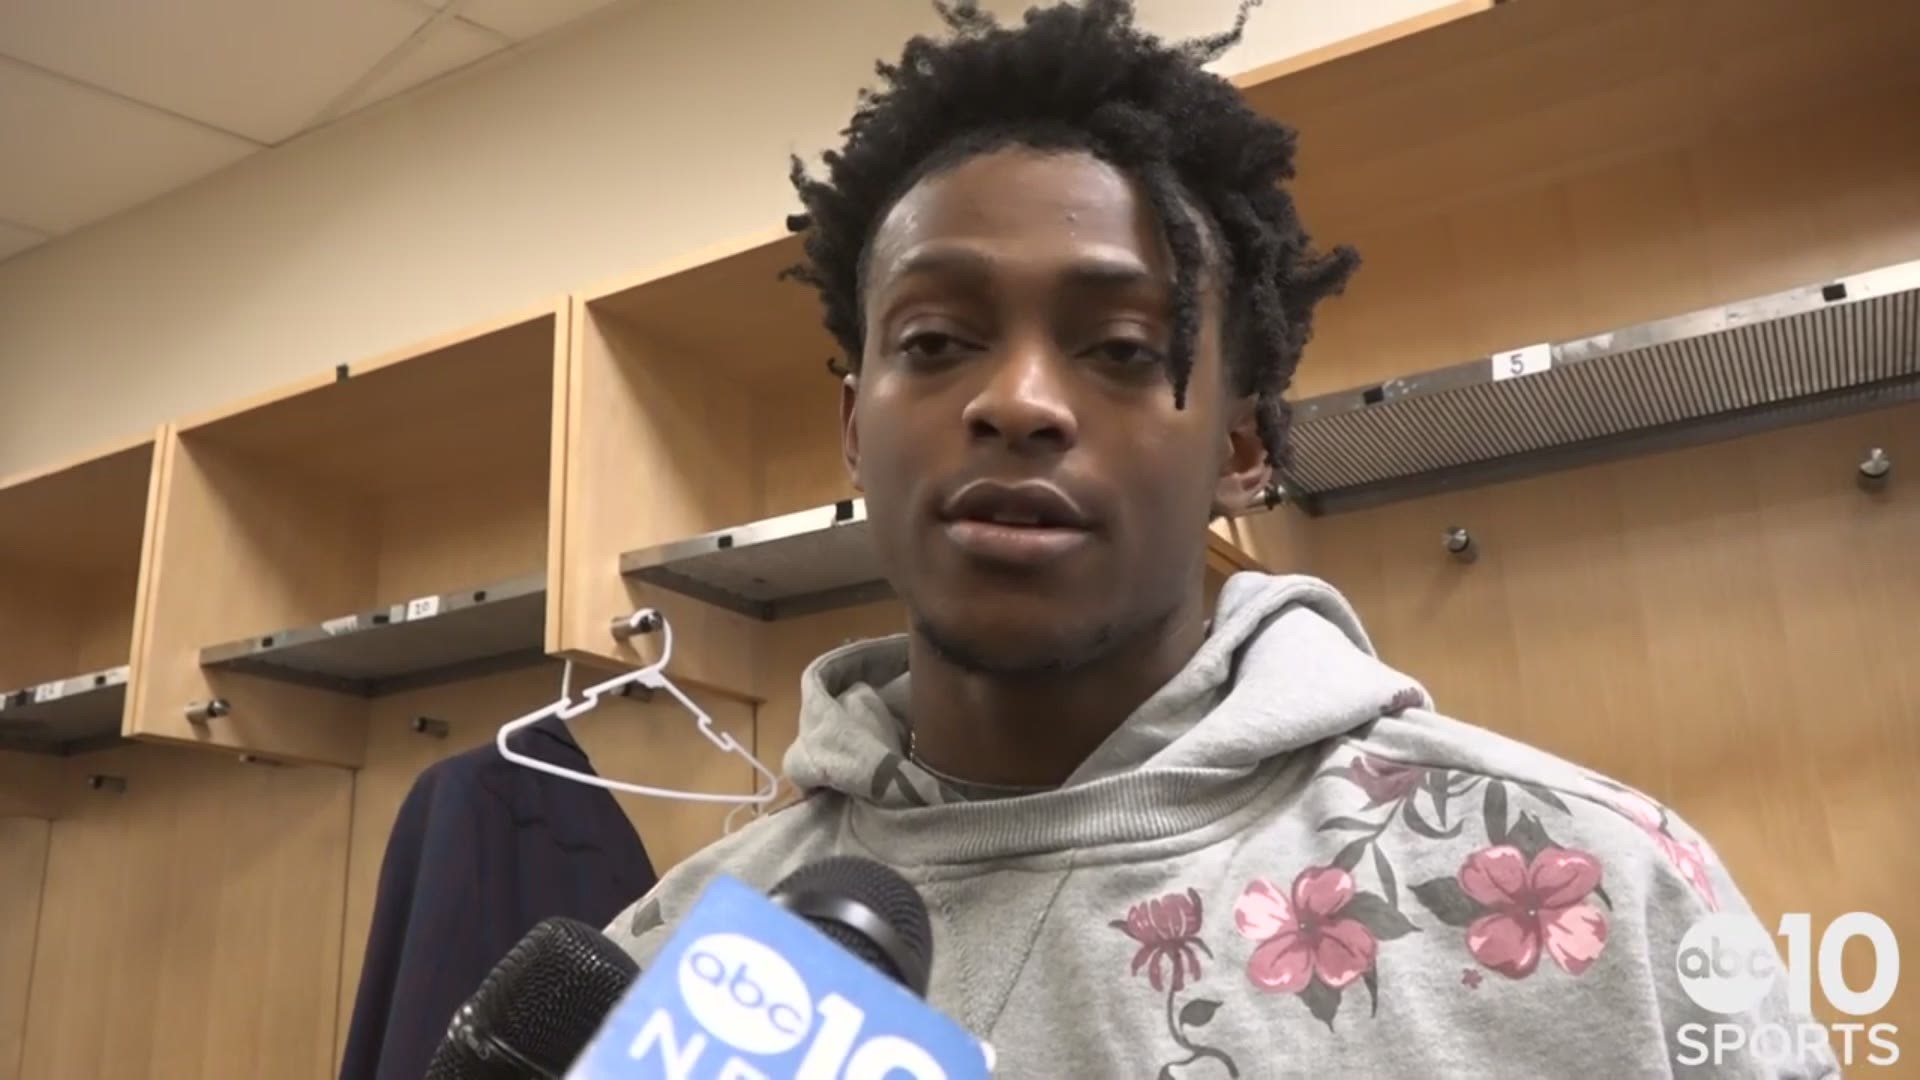 Kings PG De'Aaron Fox discusses Sunday's victory over the Knicks in New York, their second straight win and his 24-point performance while, at times, playing angry.